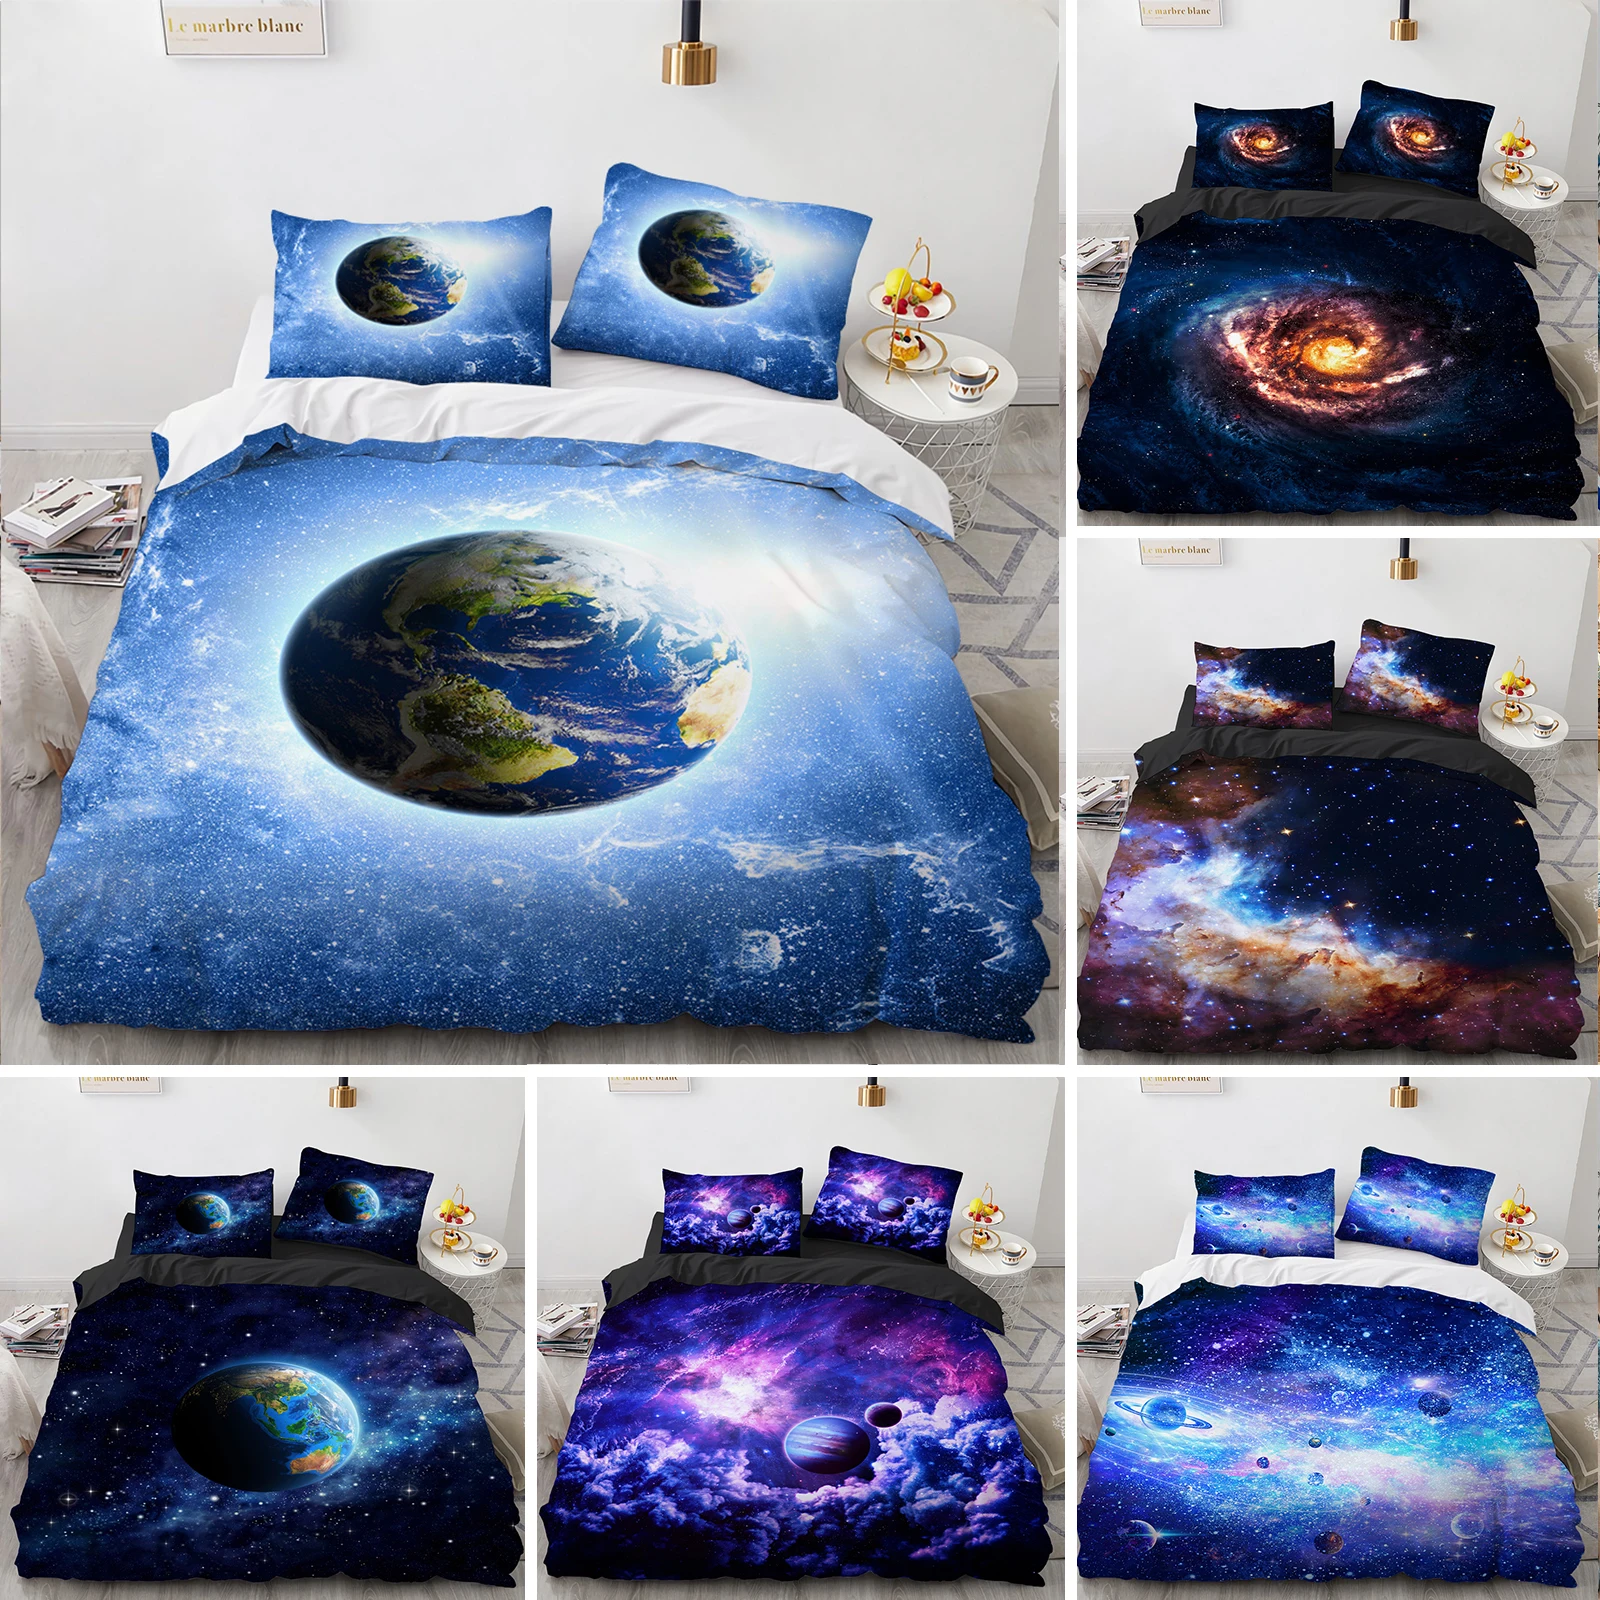 

Galaxy Planet King Queen Duvet Cover Universe Sky Bedding Set 3D Blue Earth Outer Space Astronomy 2/3pcs Polyester Quilt Cover